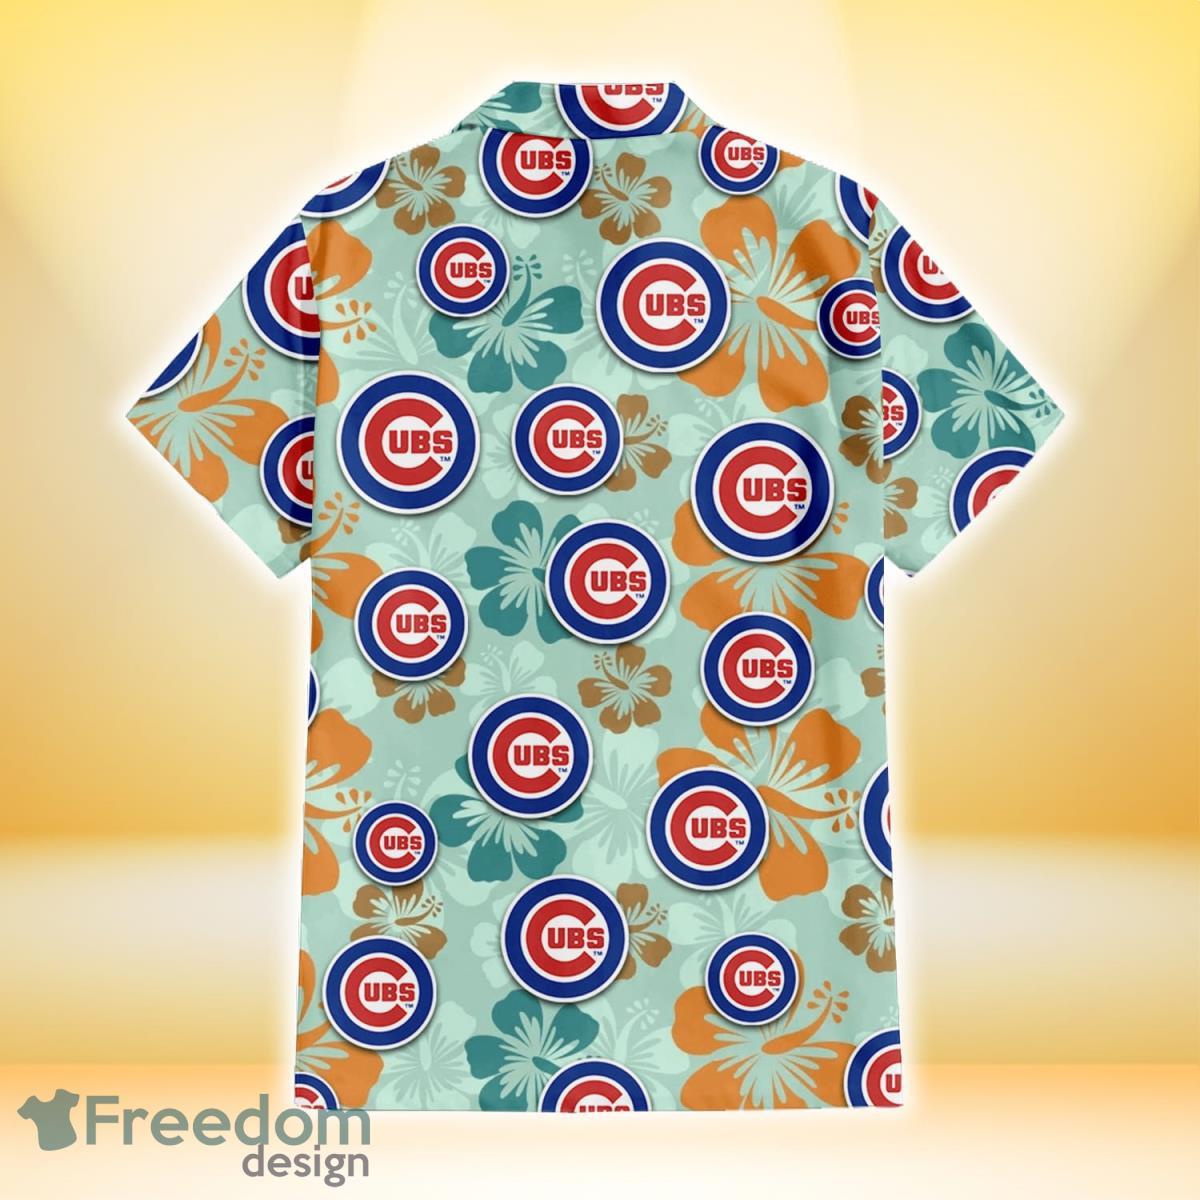 Custom Chicago Cubs T-Shirt 3D Thrilling Gifts For Cubs Fans